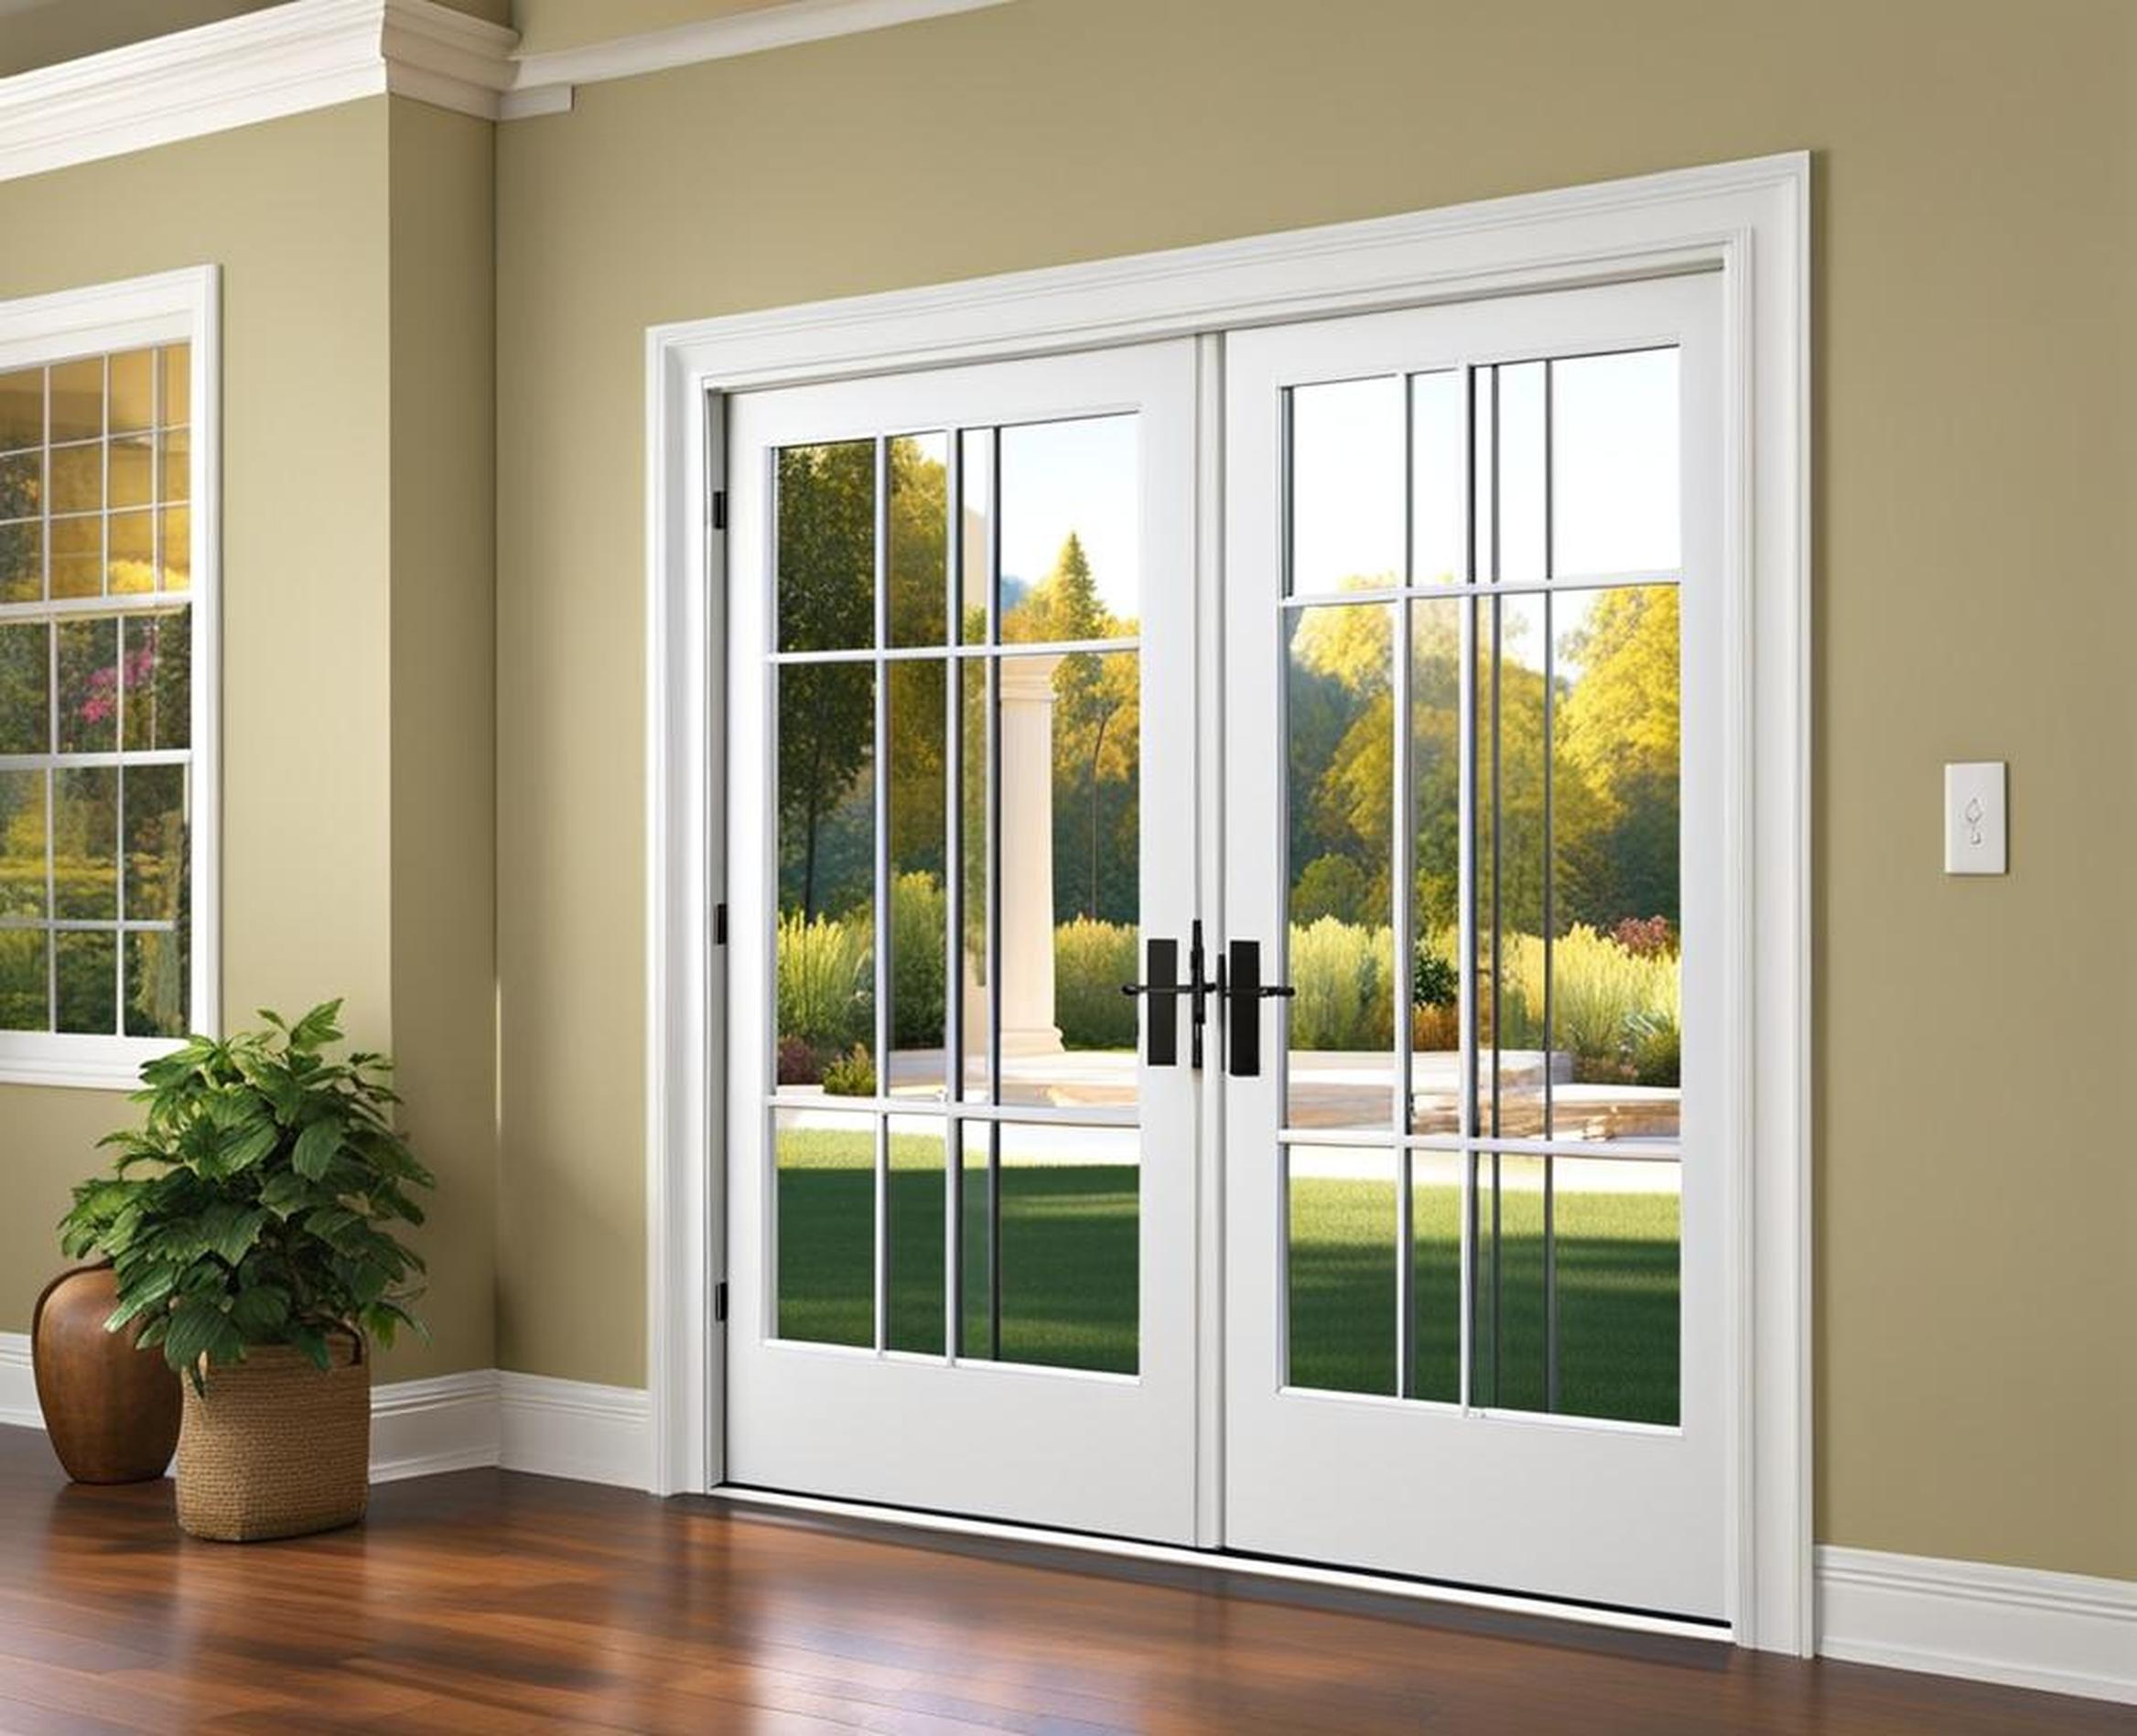 do french doors open in or out